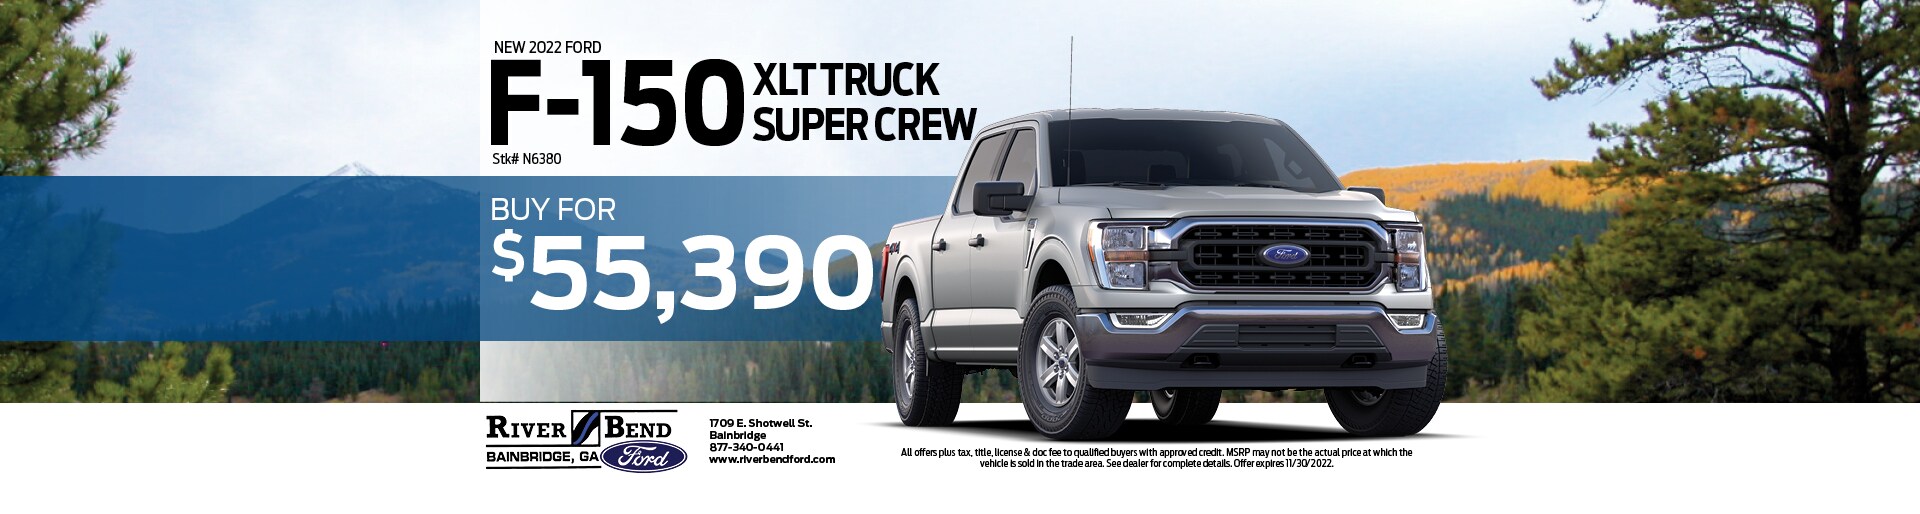 New 2022 Ford F-150 XLT Truck for $55,390